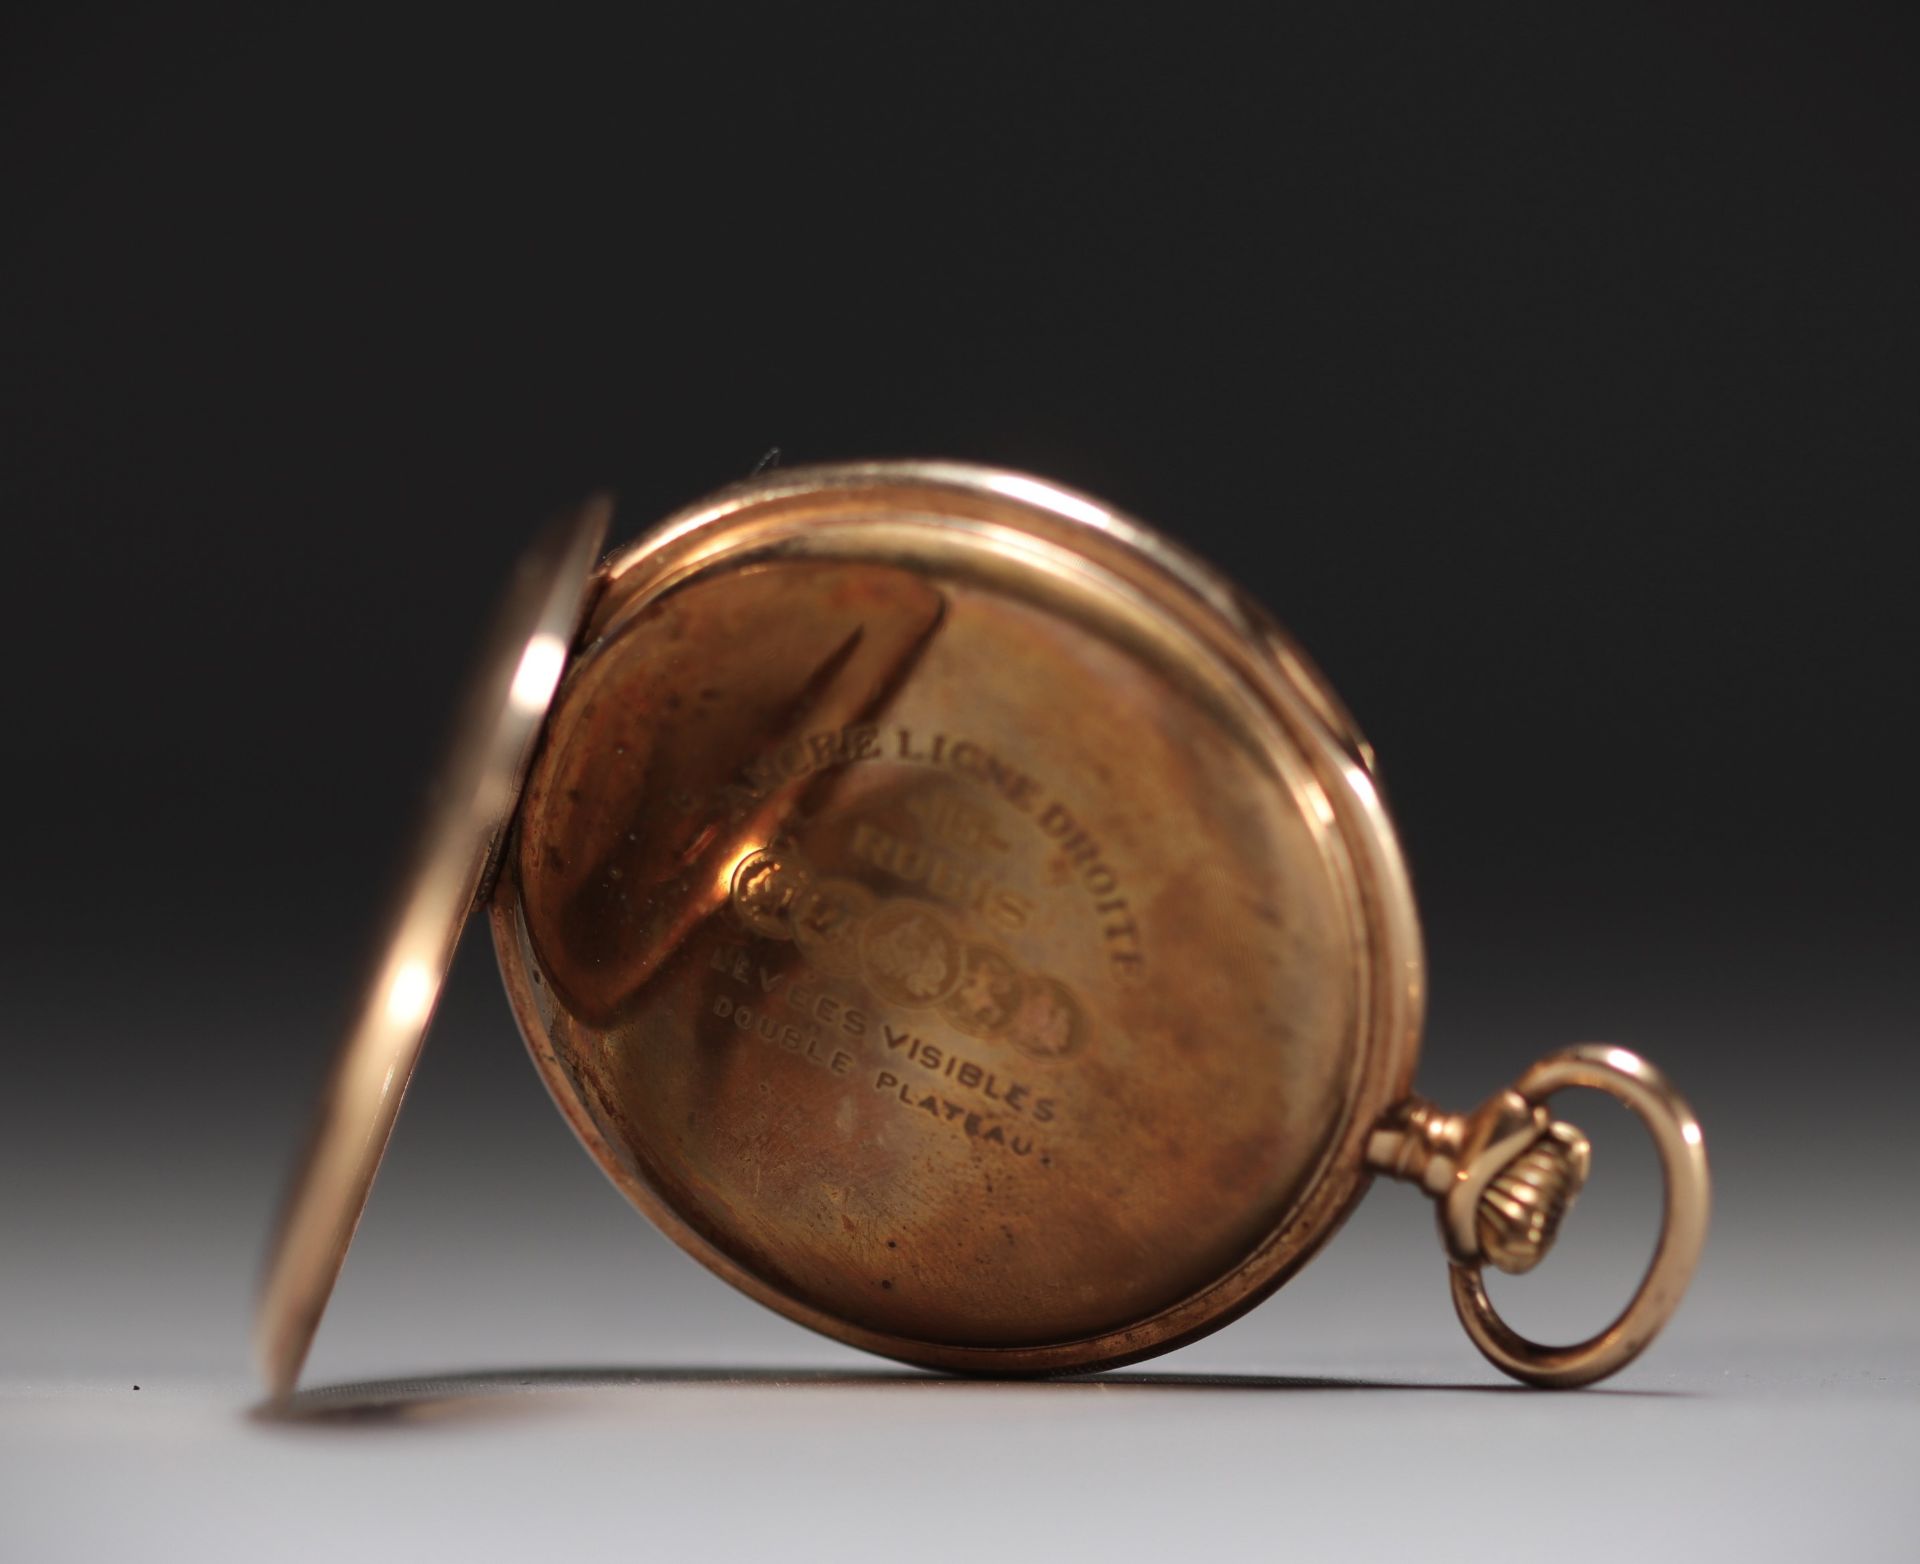 Chronometre D" pocket watch in 18k gold, total weight 70.3 g. - Image 3 of 3